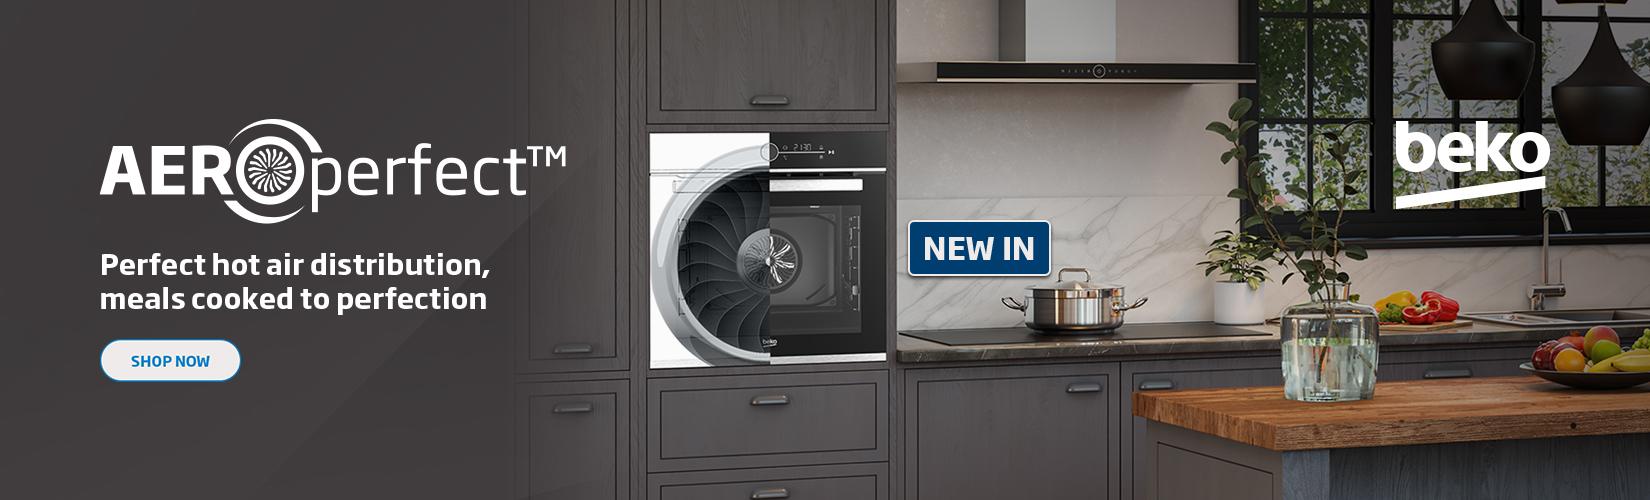 Beko. Aeroperfect. Perfect hot air distribution, meals cooked to perfection.